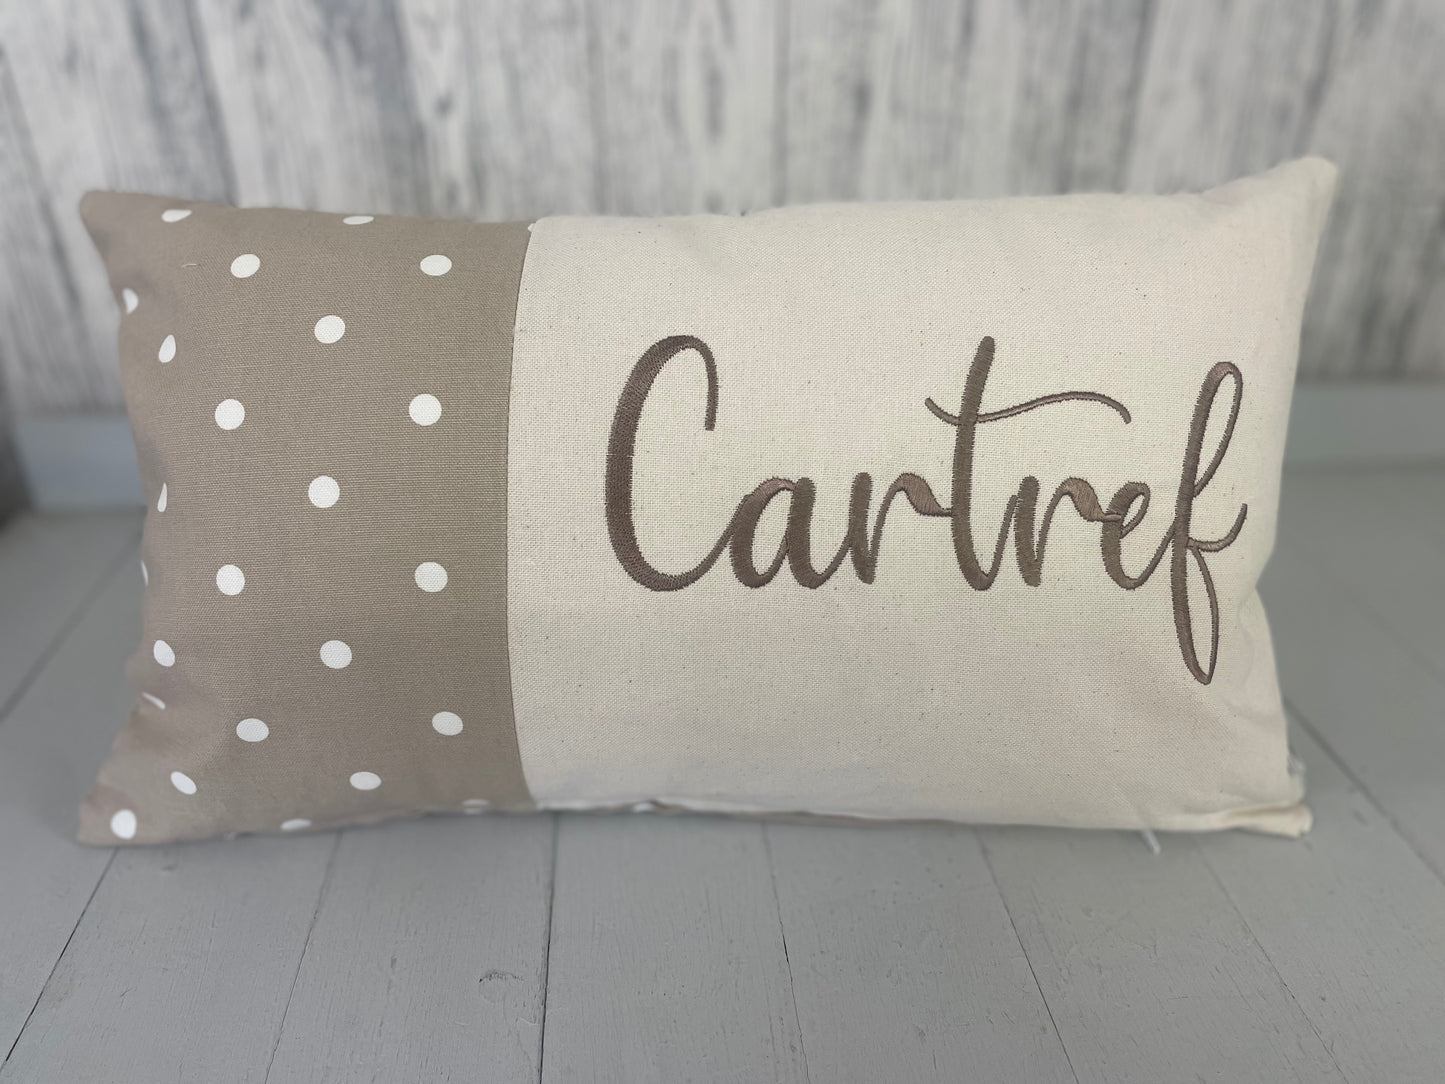 Cartref Dotty fabric  Panel Cushion- Choice of 4 Colours